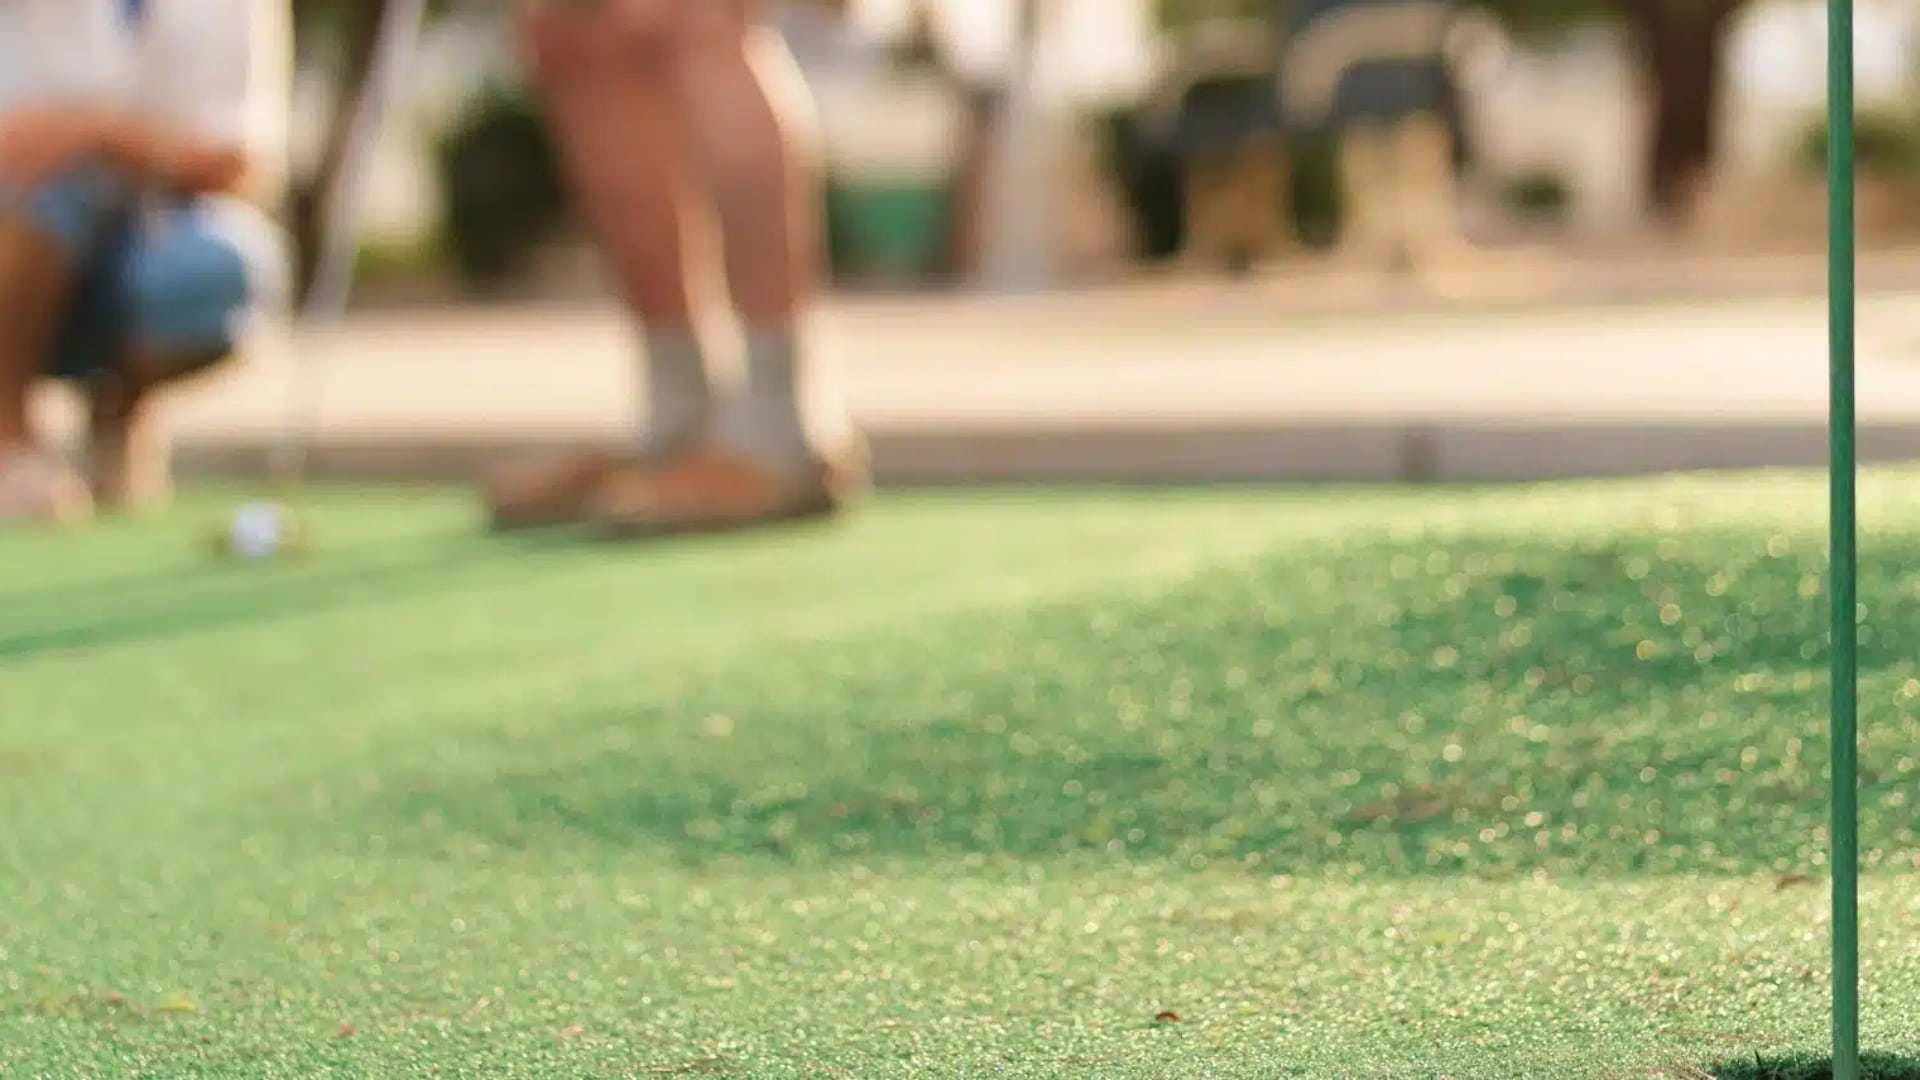 Close up view of hole on mini golf course with a blurred person in the background putting